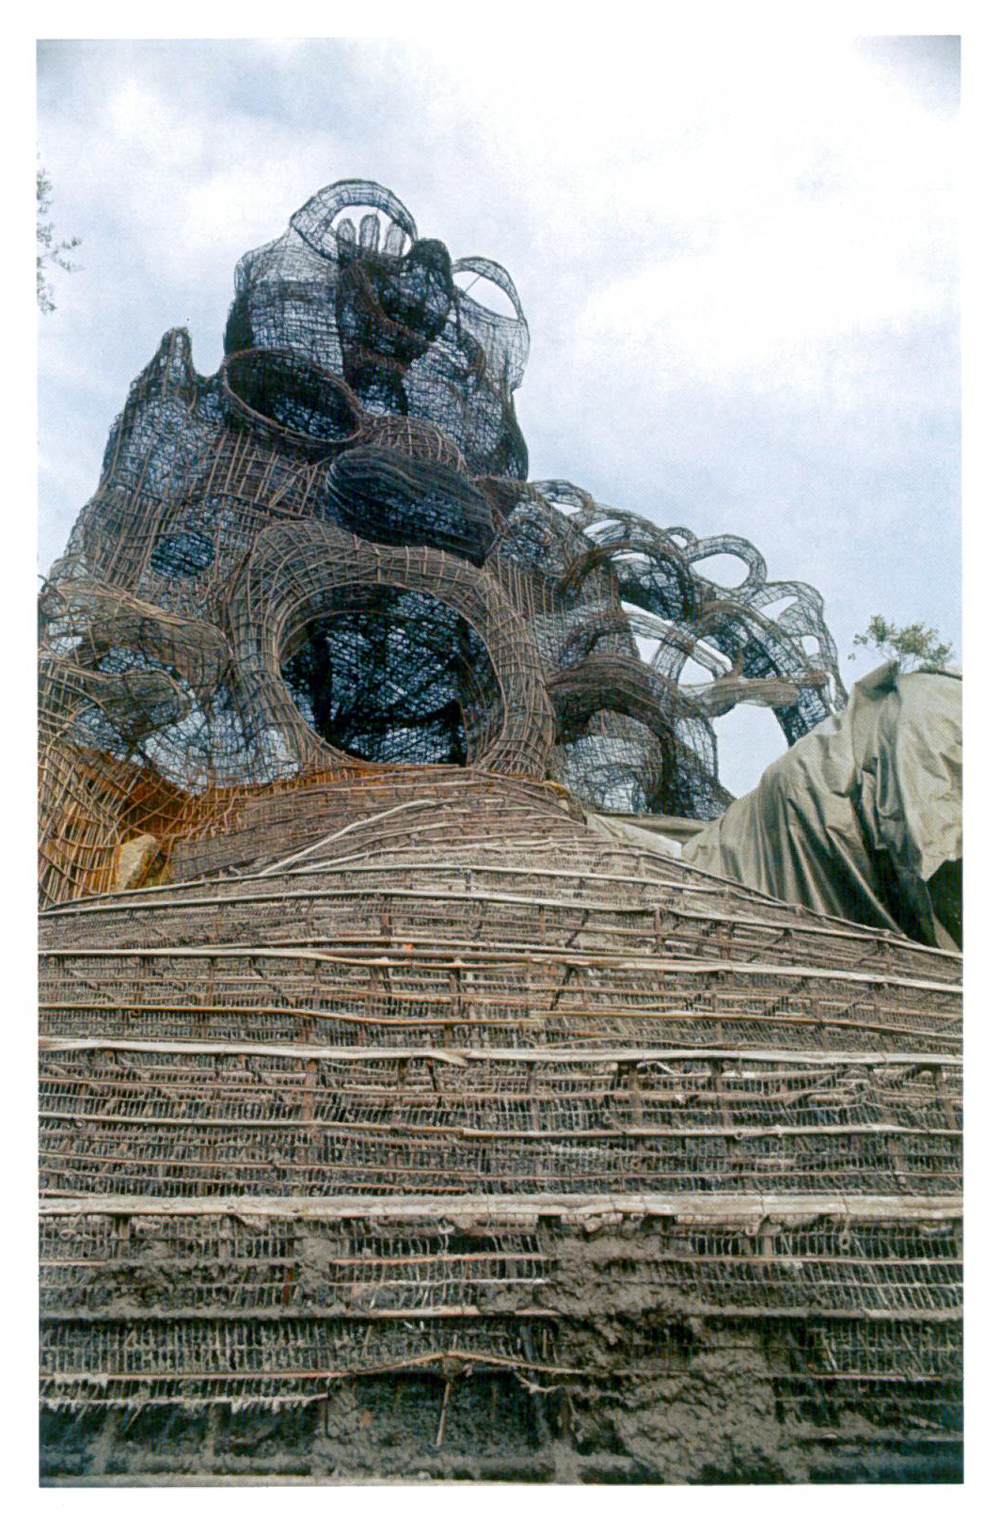 The High Priestess, with The Magician atop her, under construction, in 1982. All rebar has now been placed, and cement will soon cover the entire structure. Image courtesy of Il Fondazione Giardino Dei Tarocchi.